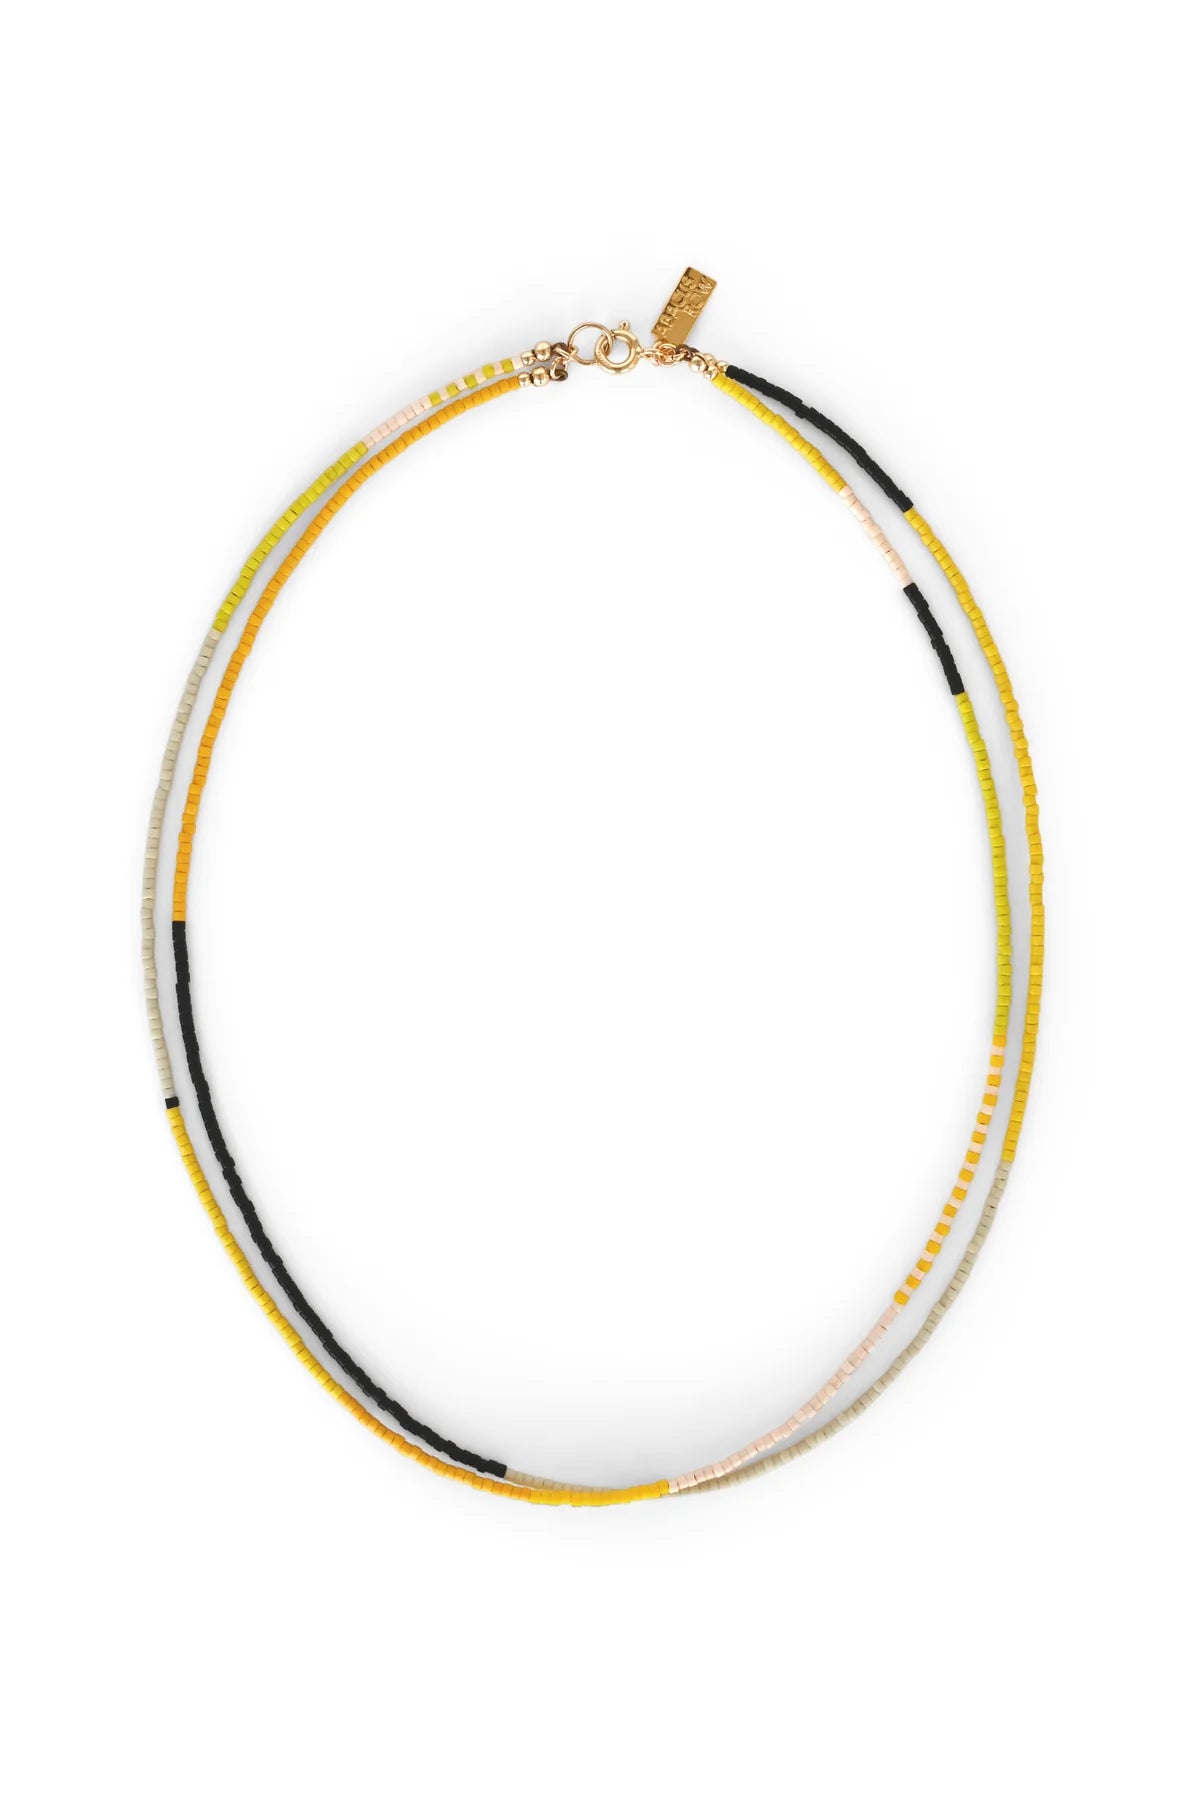 A YELLOW SUN NECKLACE